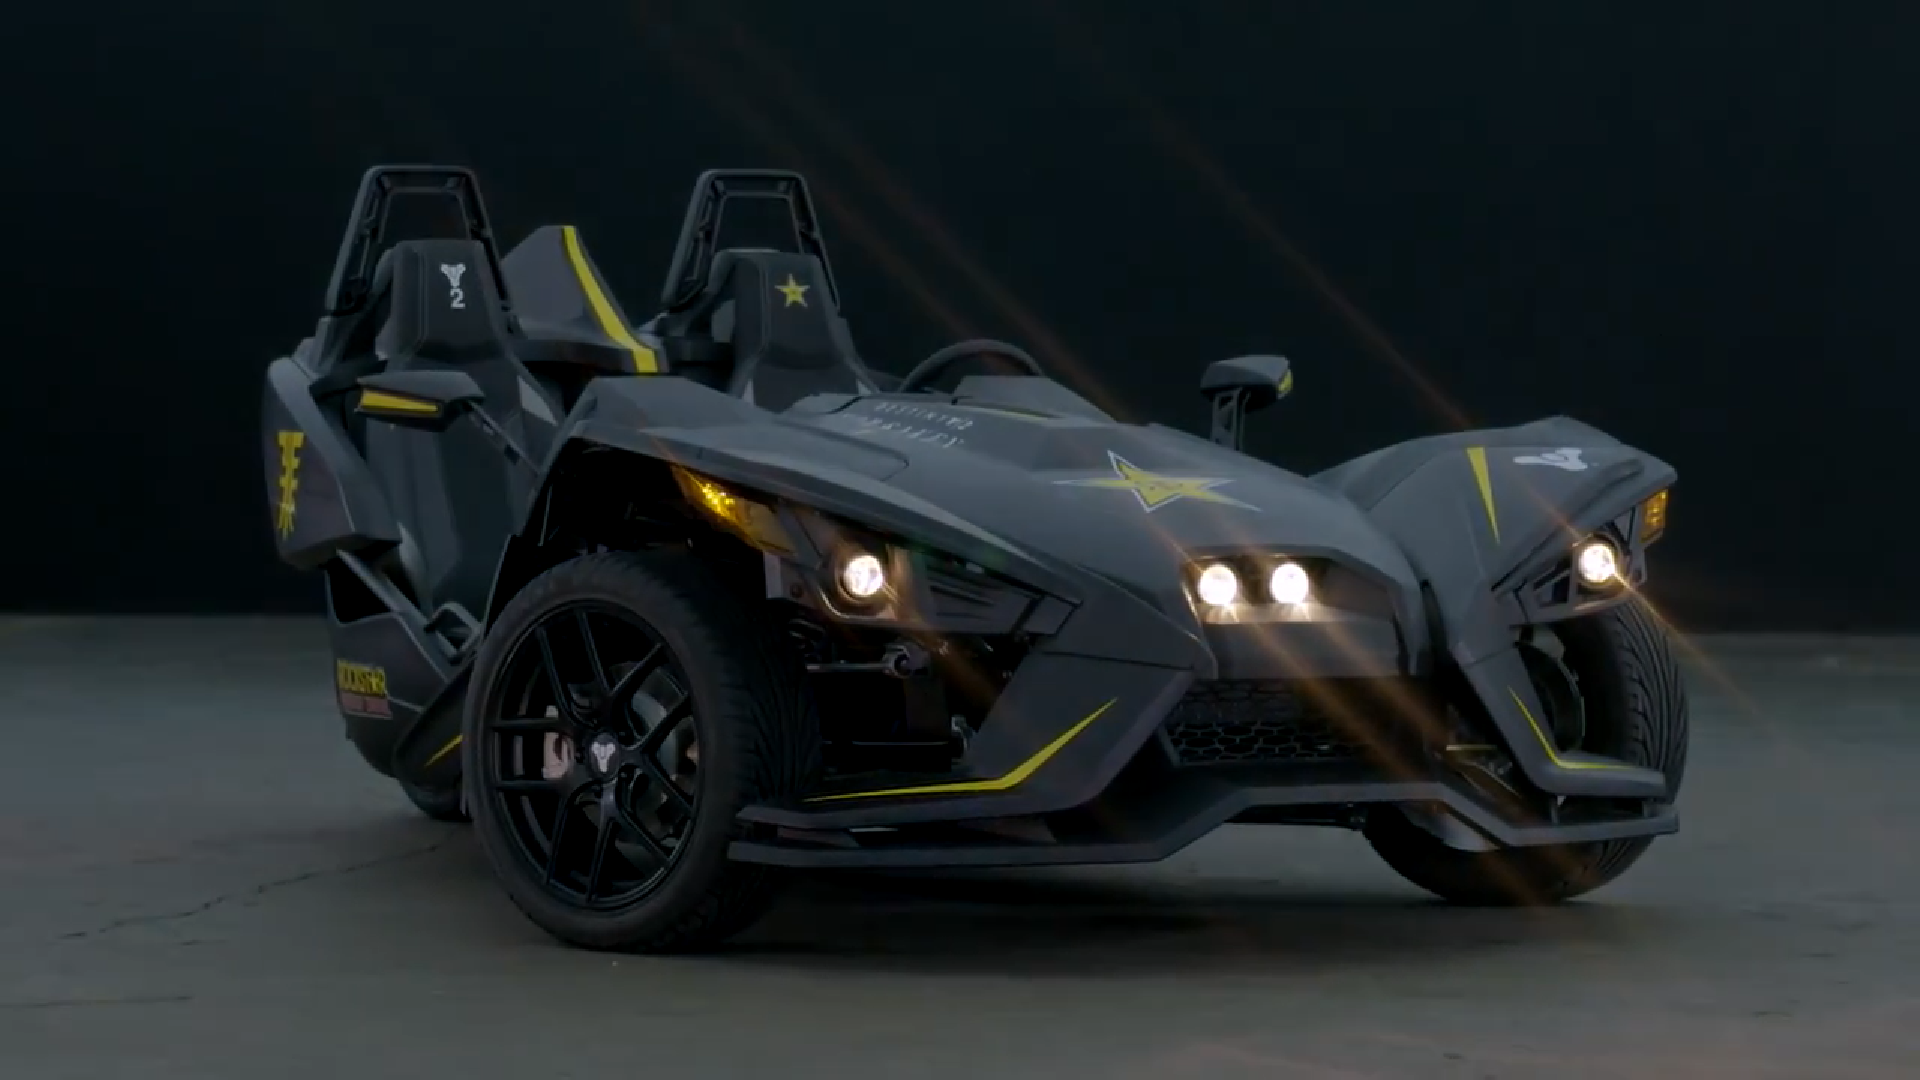 You Could Win a Polaris Slingshot by Drinking Rockstar